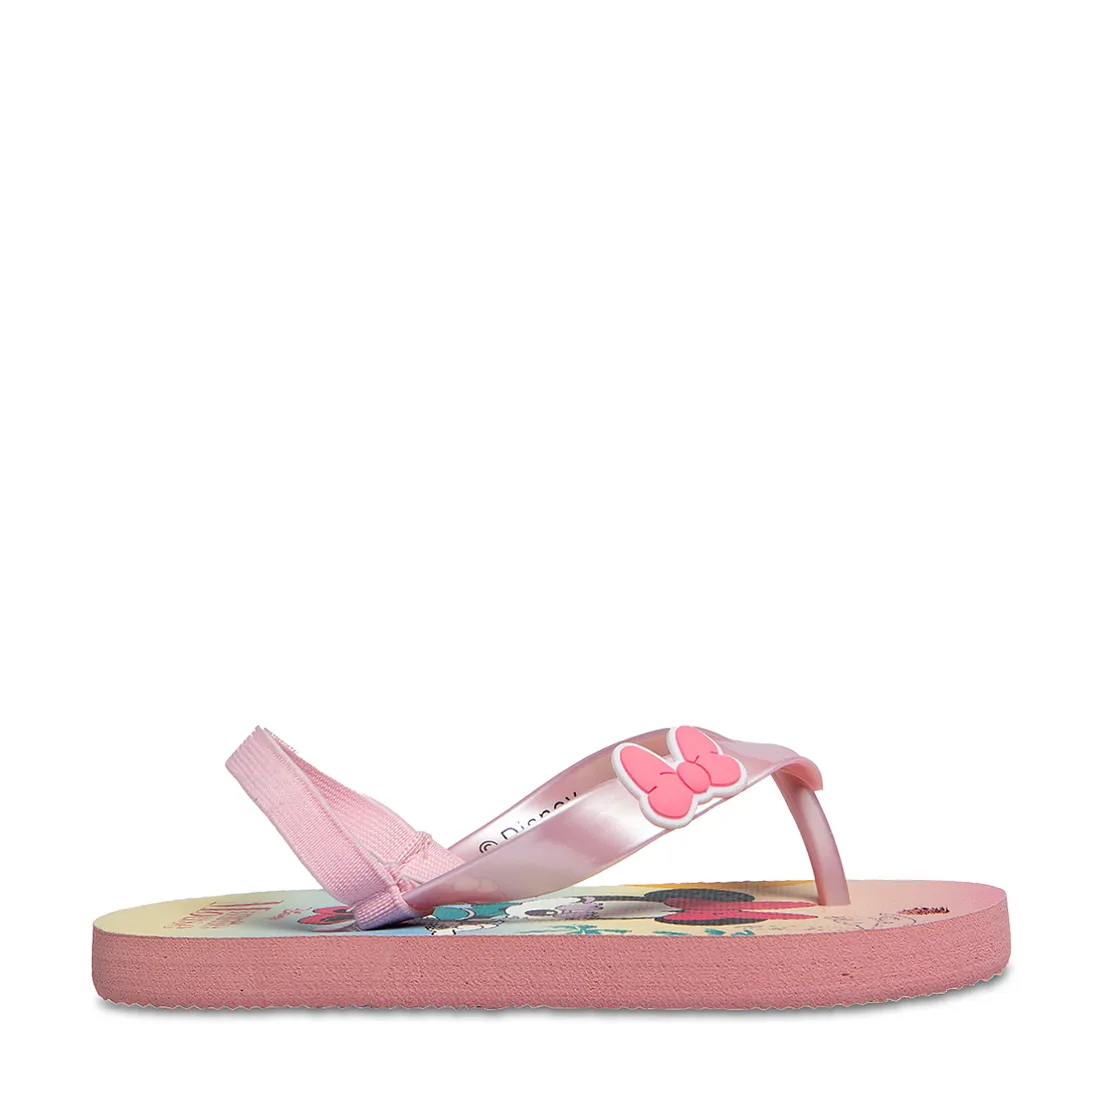 Minnie Mouse flip flop pink - GIRLS 2-8 YEARS Shoes | Ackermans